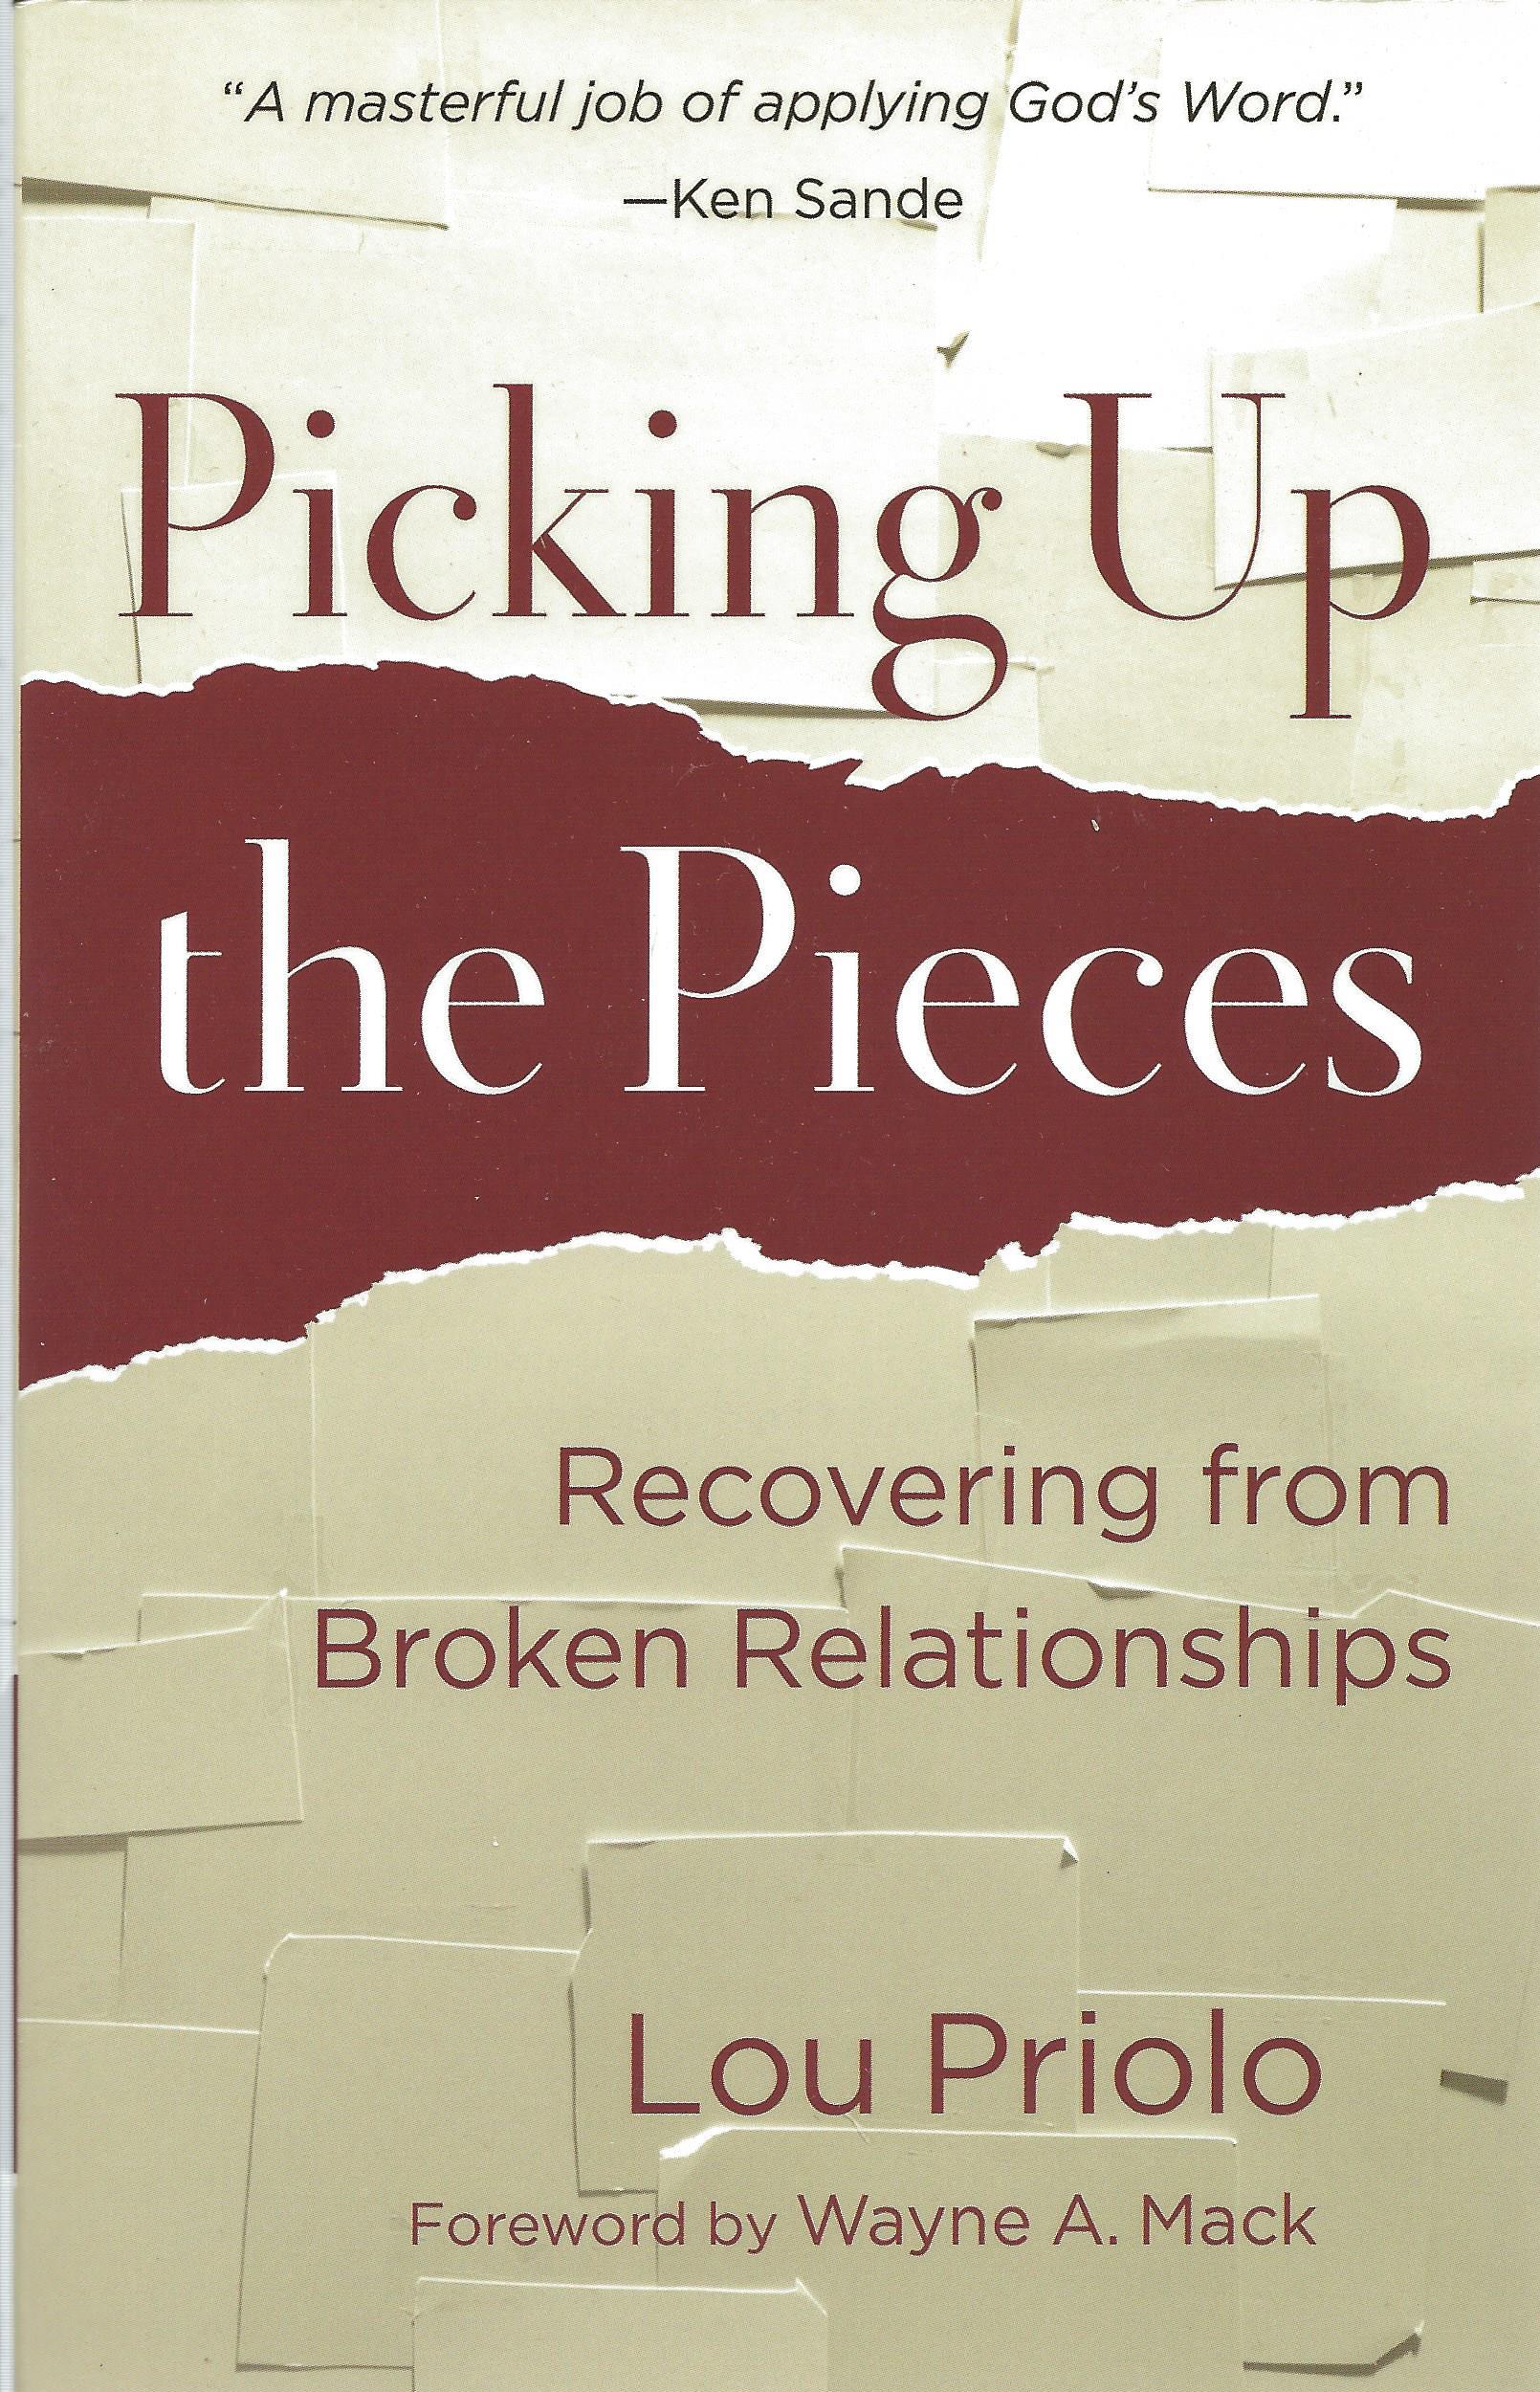 PICKING UP THE PIECES Lou Priolo